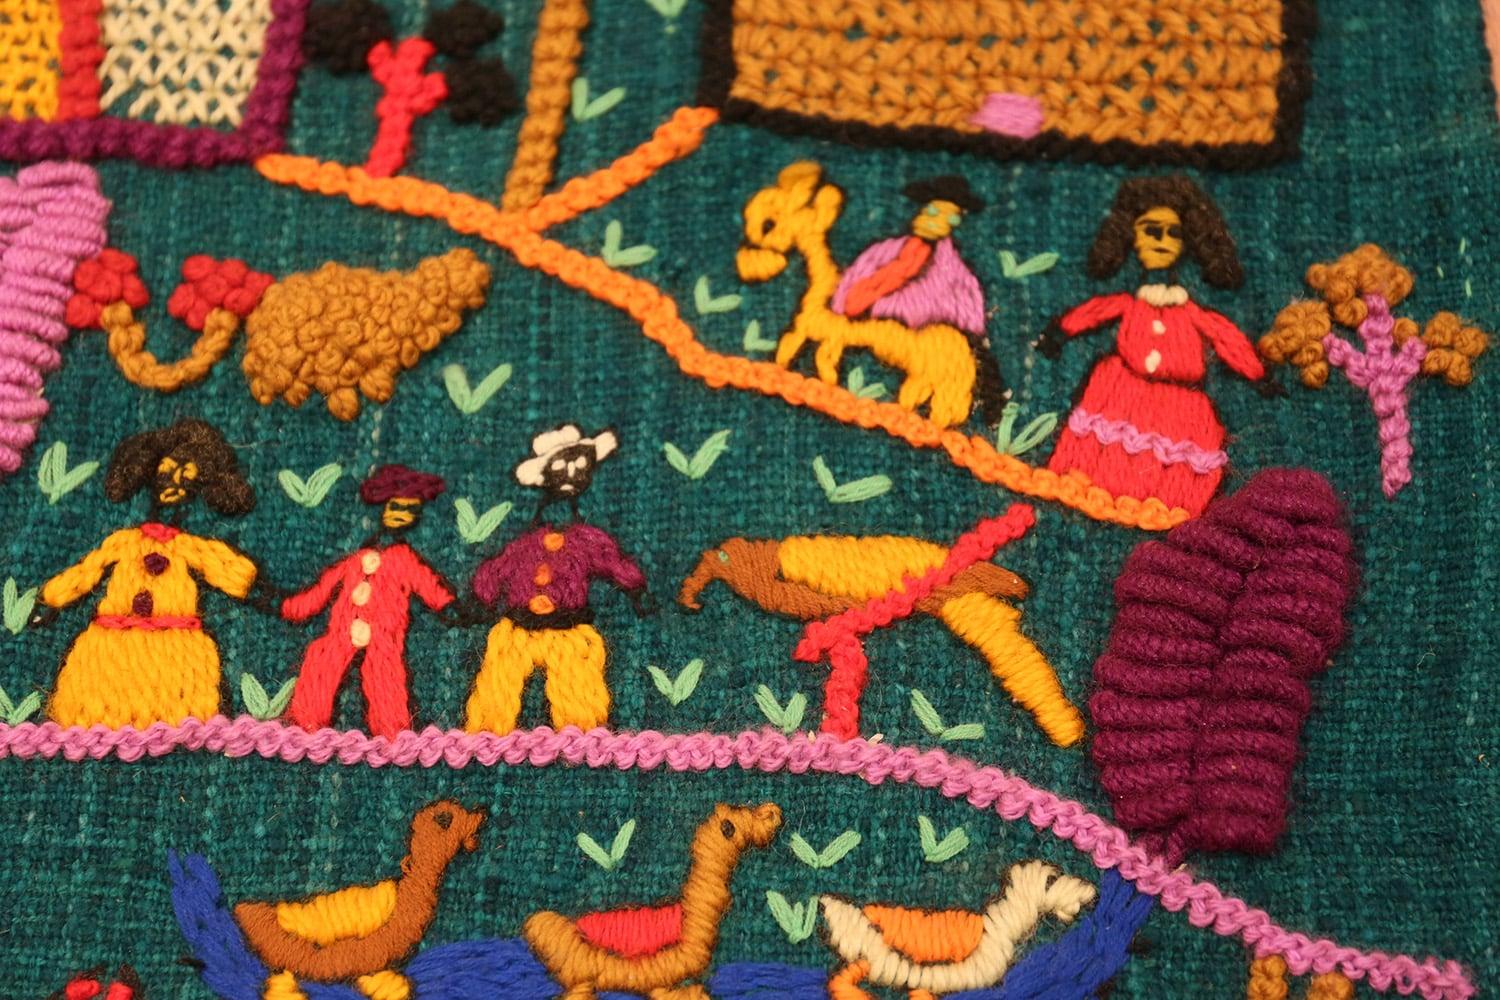 Hand-Knotted Beautiful Vintage Needlepoint / Colombian Arpillera Embroidery 2'1